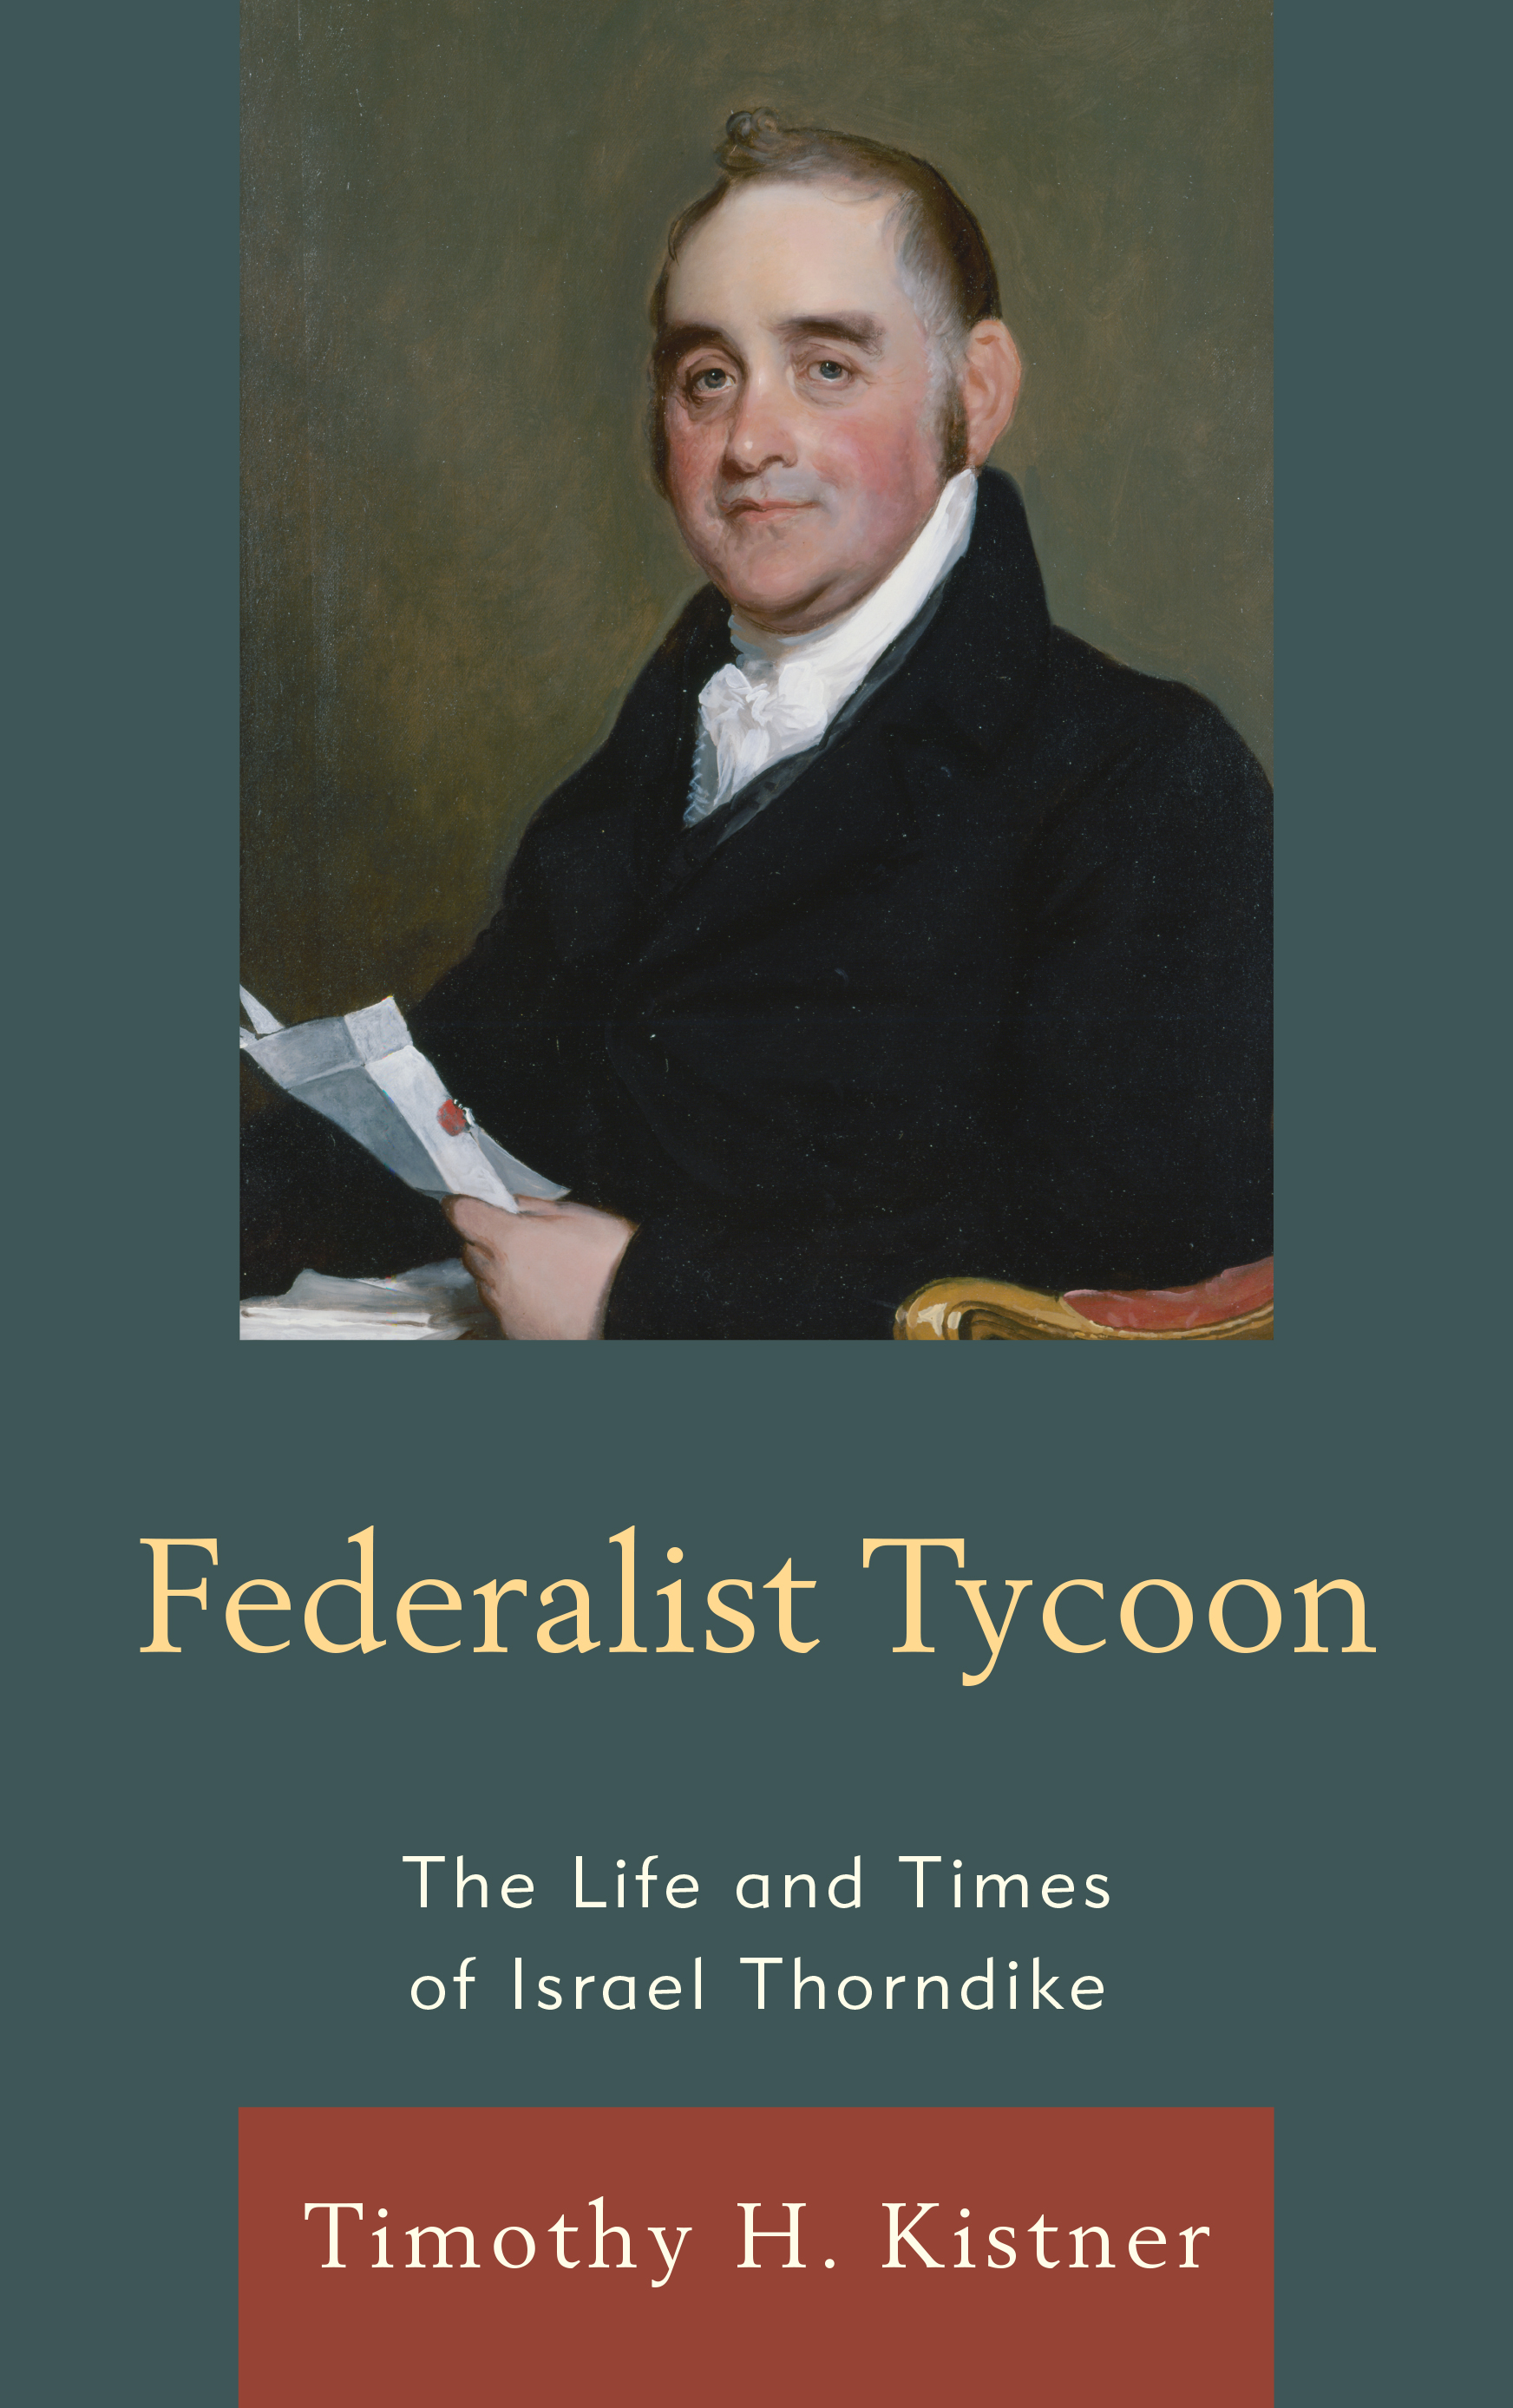 Federalist Tycoon: The Life and Times of Israel Thorndike